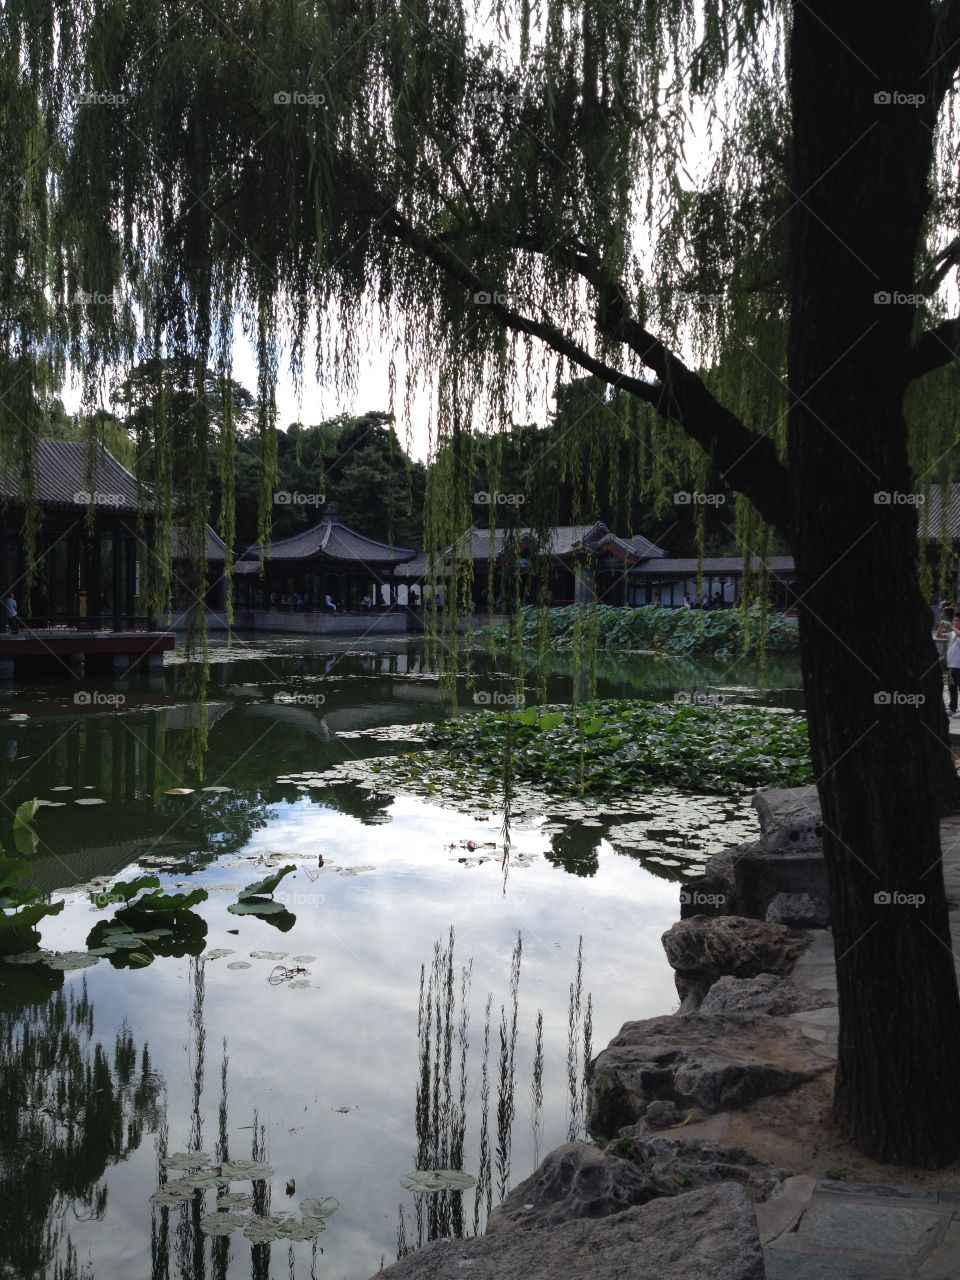 Garden of tranquility - China 